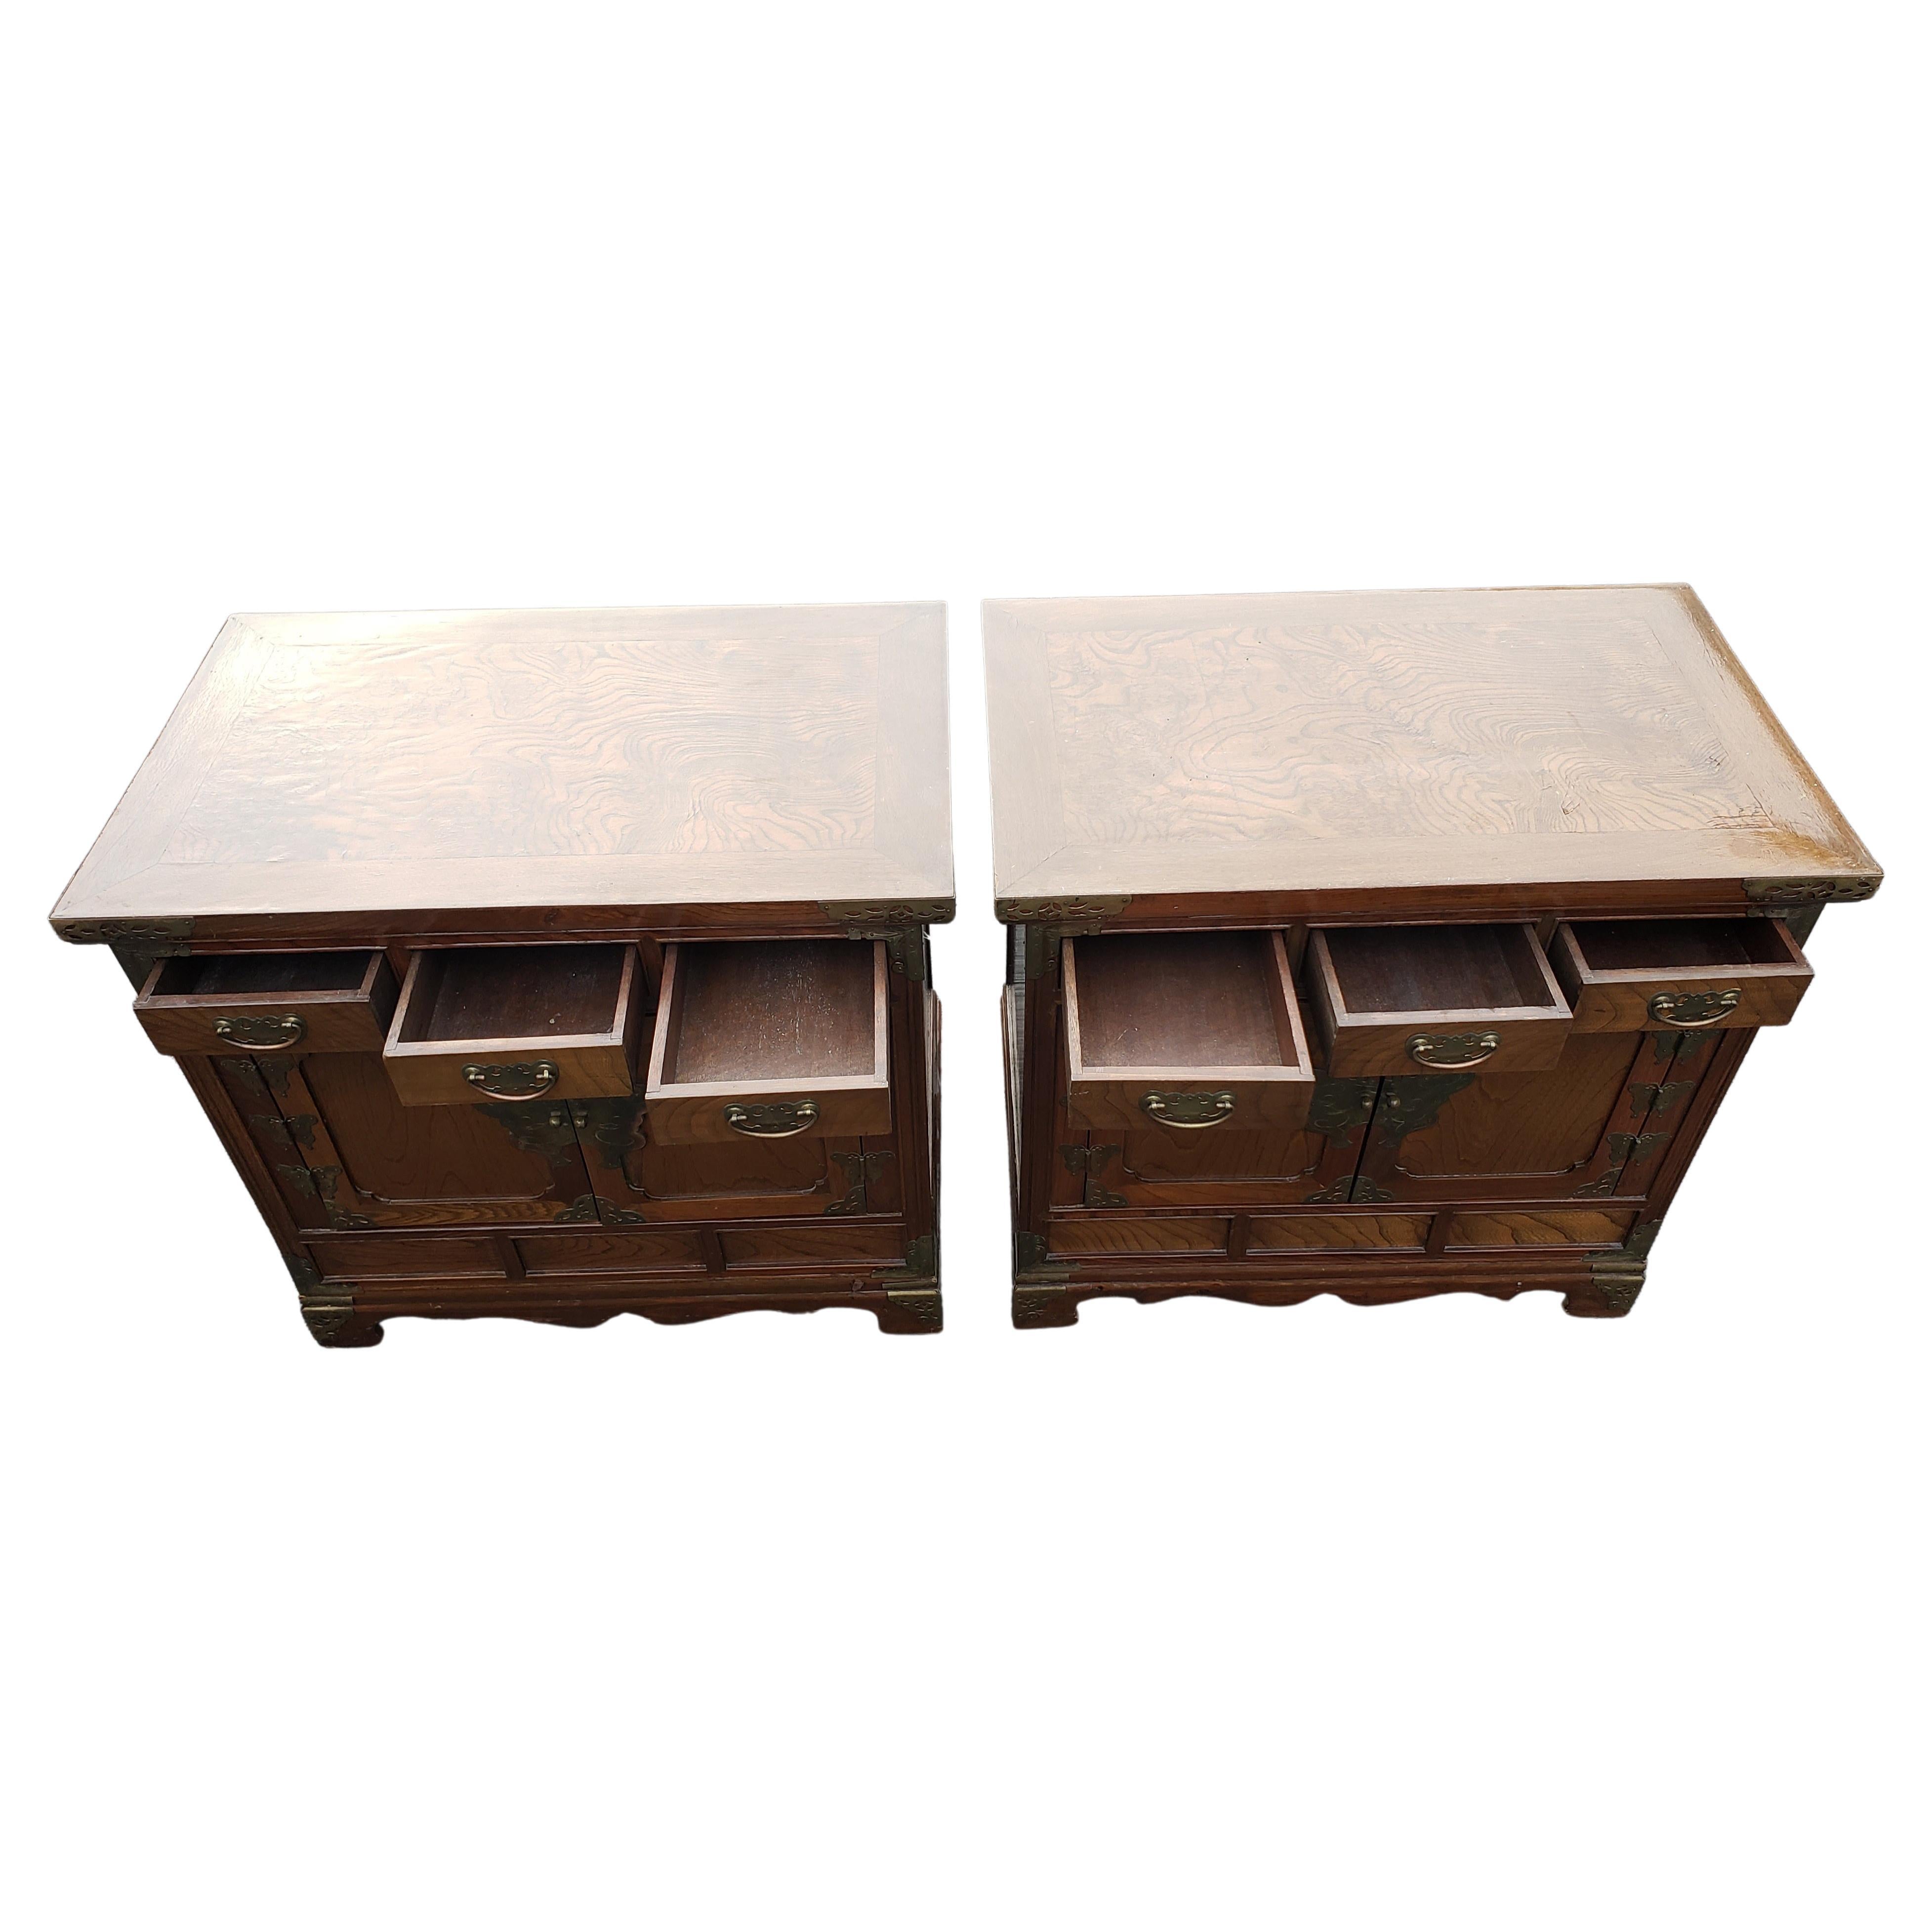 Mid-20th Century Tansu Campaign Walnut Burl w/ Brass Fittings Nightstands Side Tables, C. 1930s